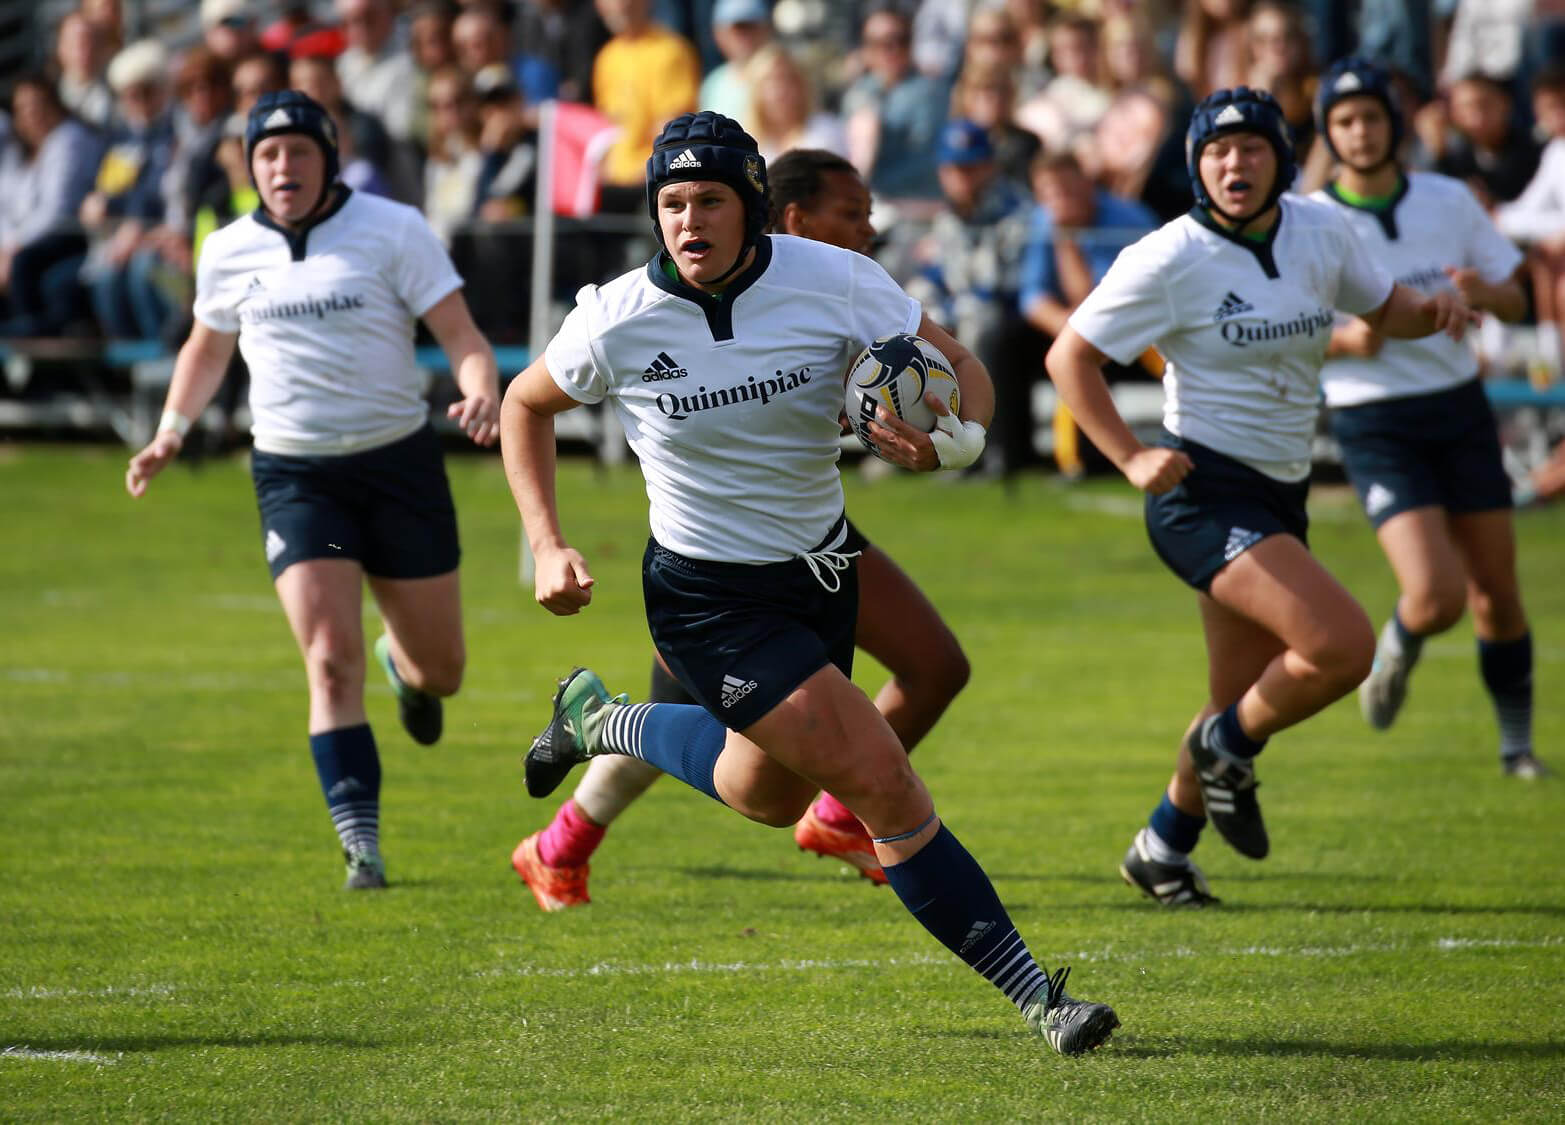 Ilona Maher on the rugby field in a game with her teammates